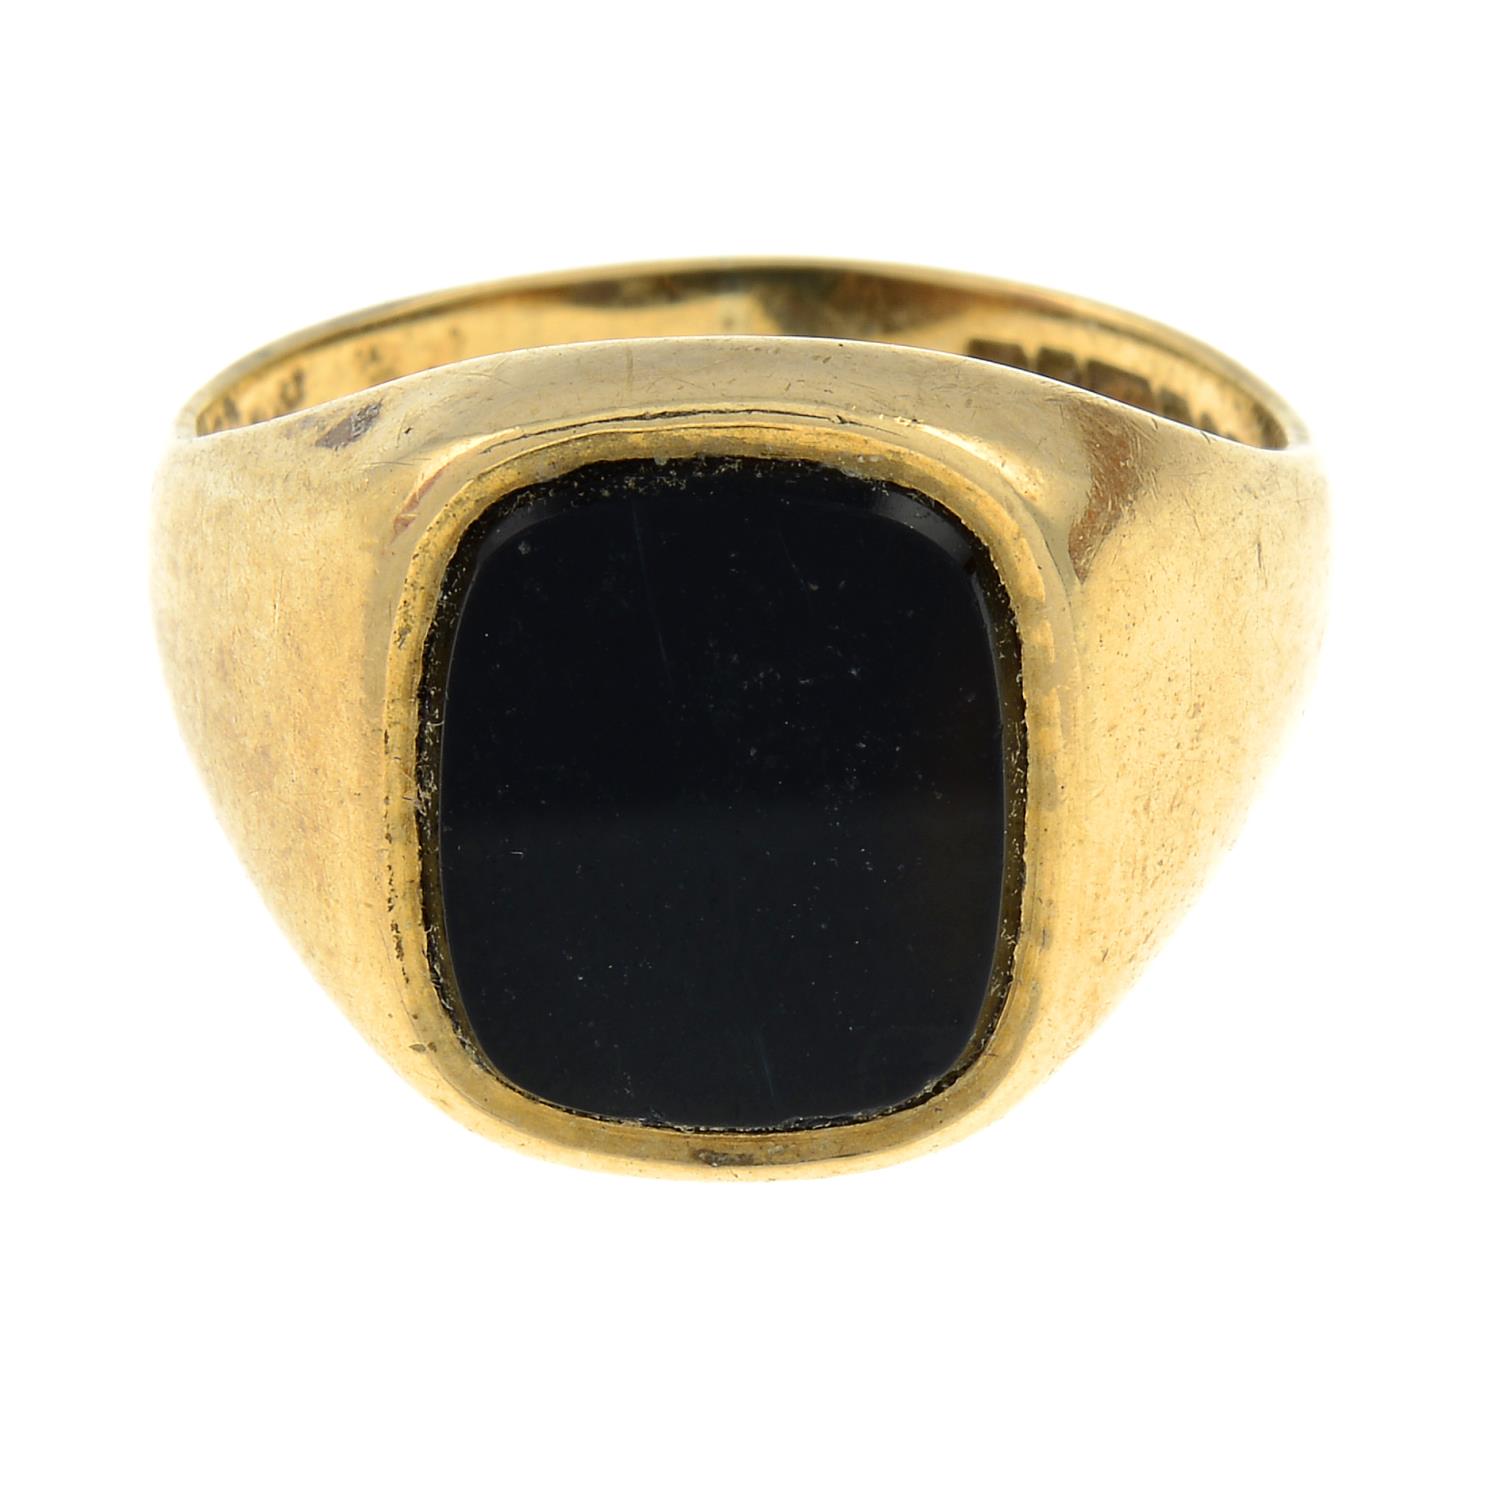 A 9ct gold onyx signet ring.Hallmarks for 9ct gold.